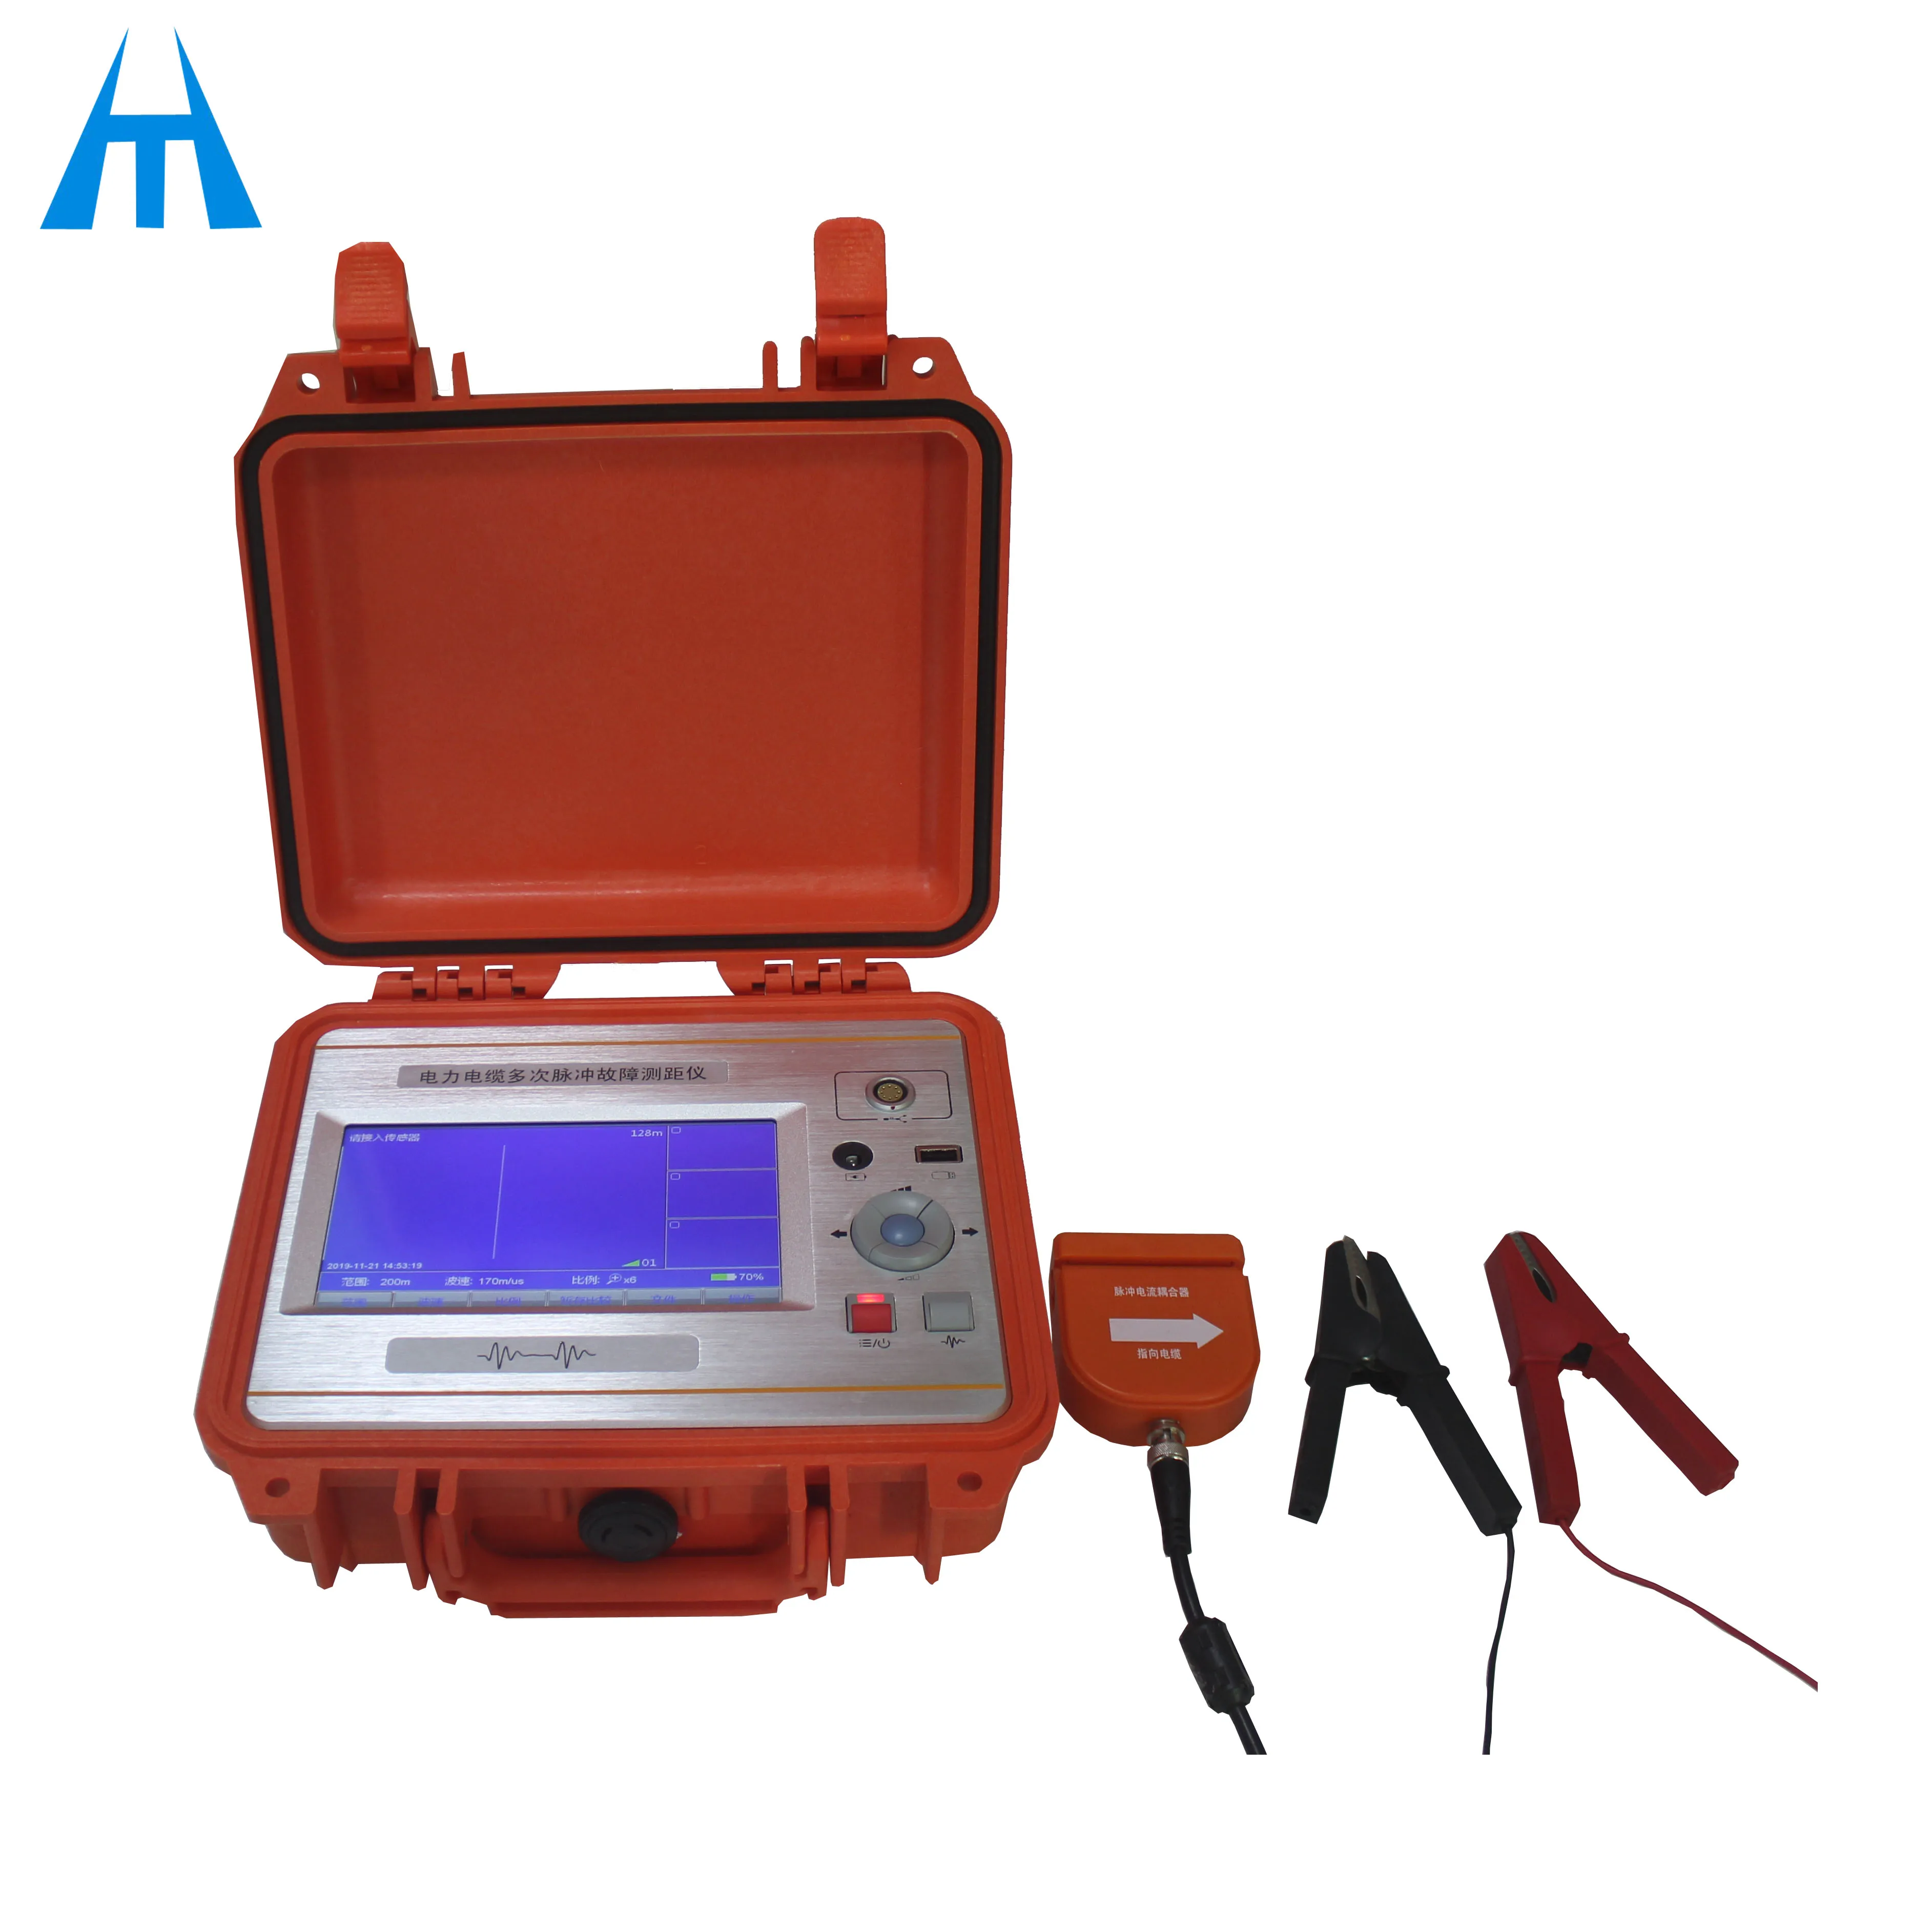 ZT-DL6000 Full set Intelligent Cable Fault Tester Underground Cable Locator Cable Fault Detector